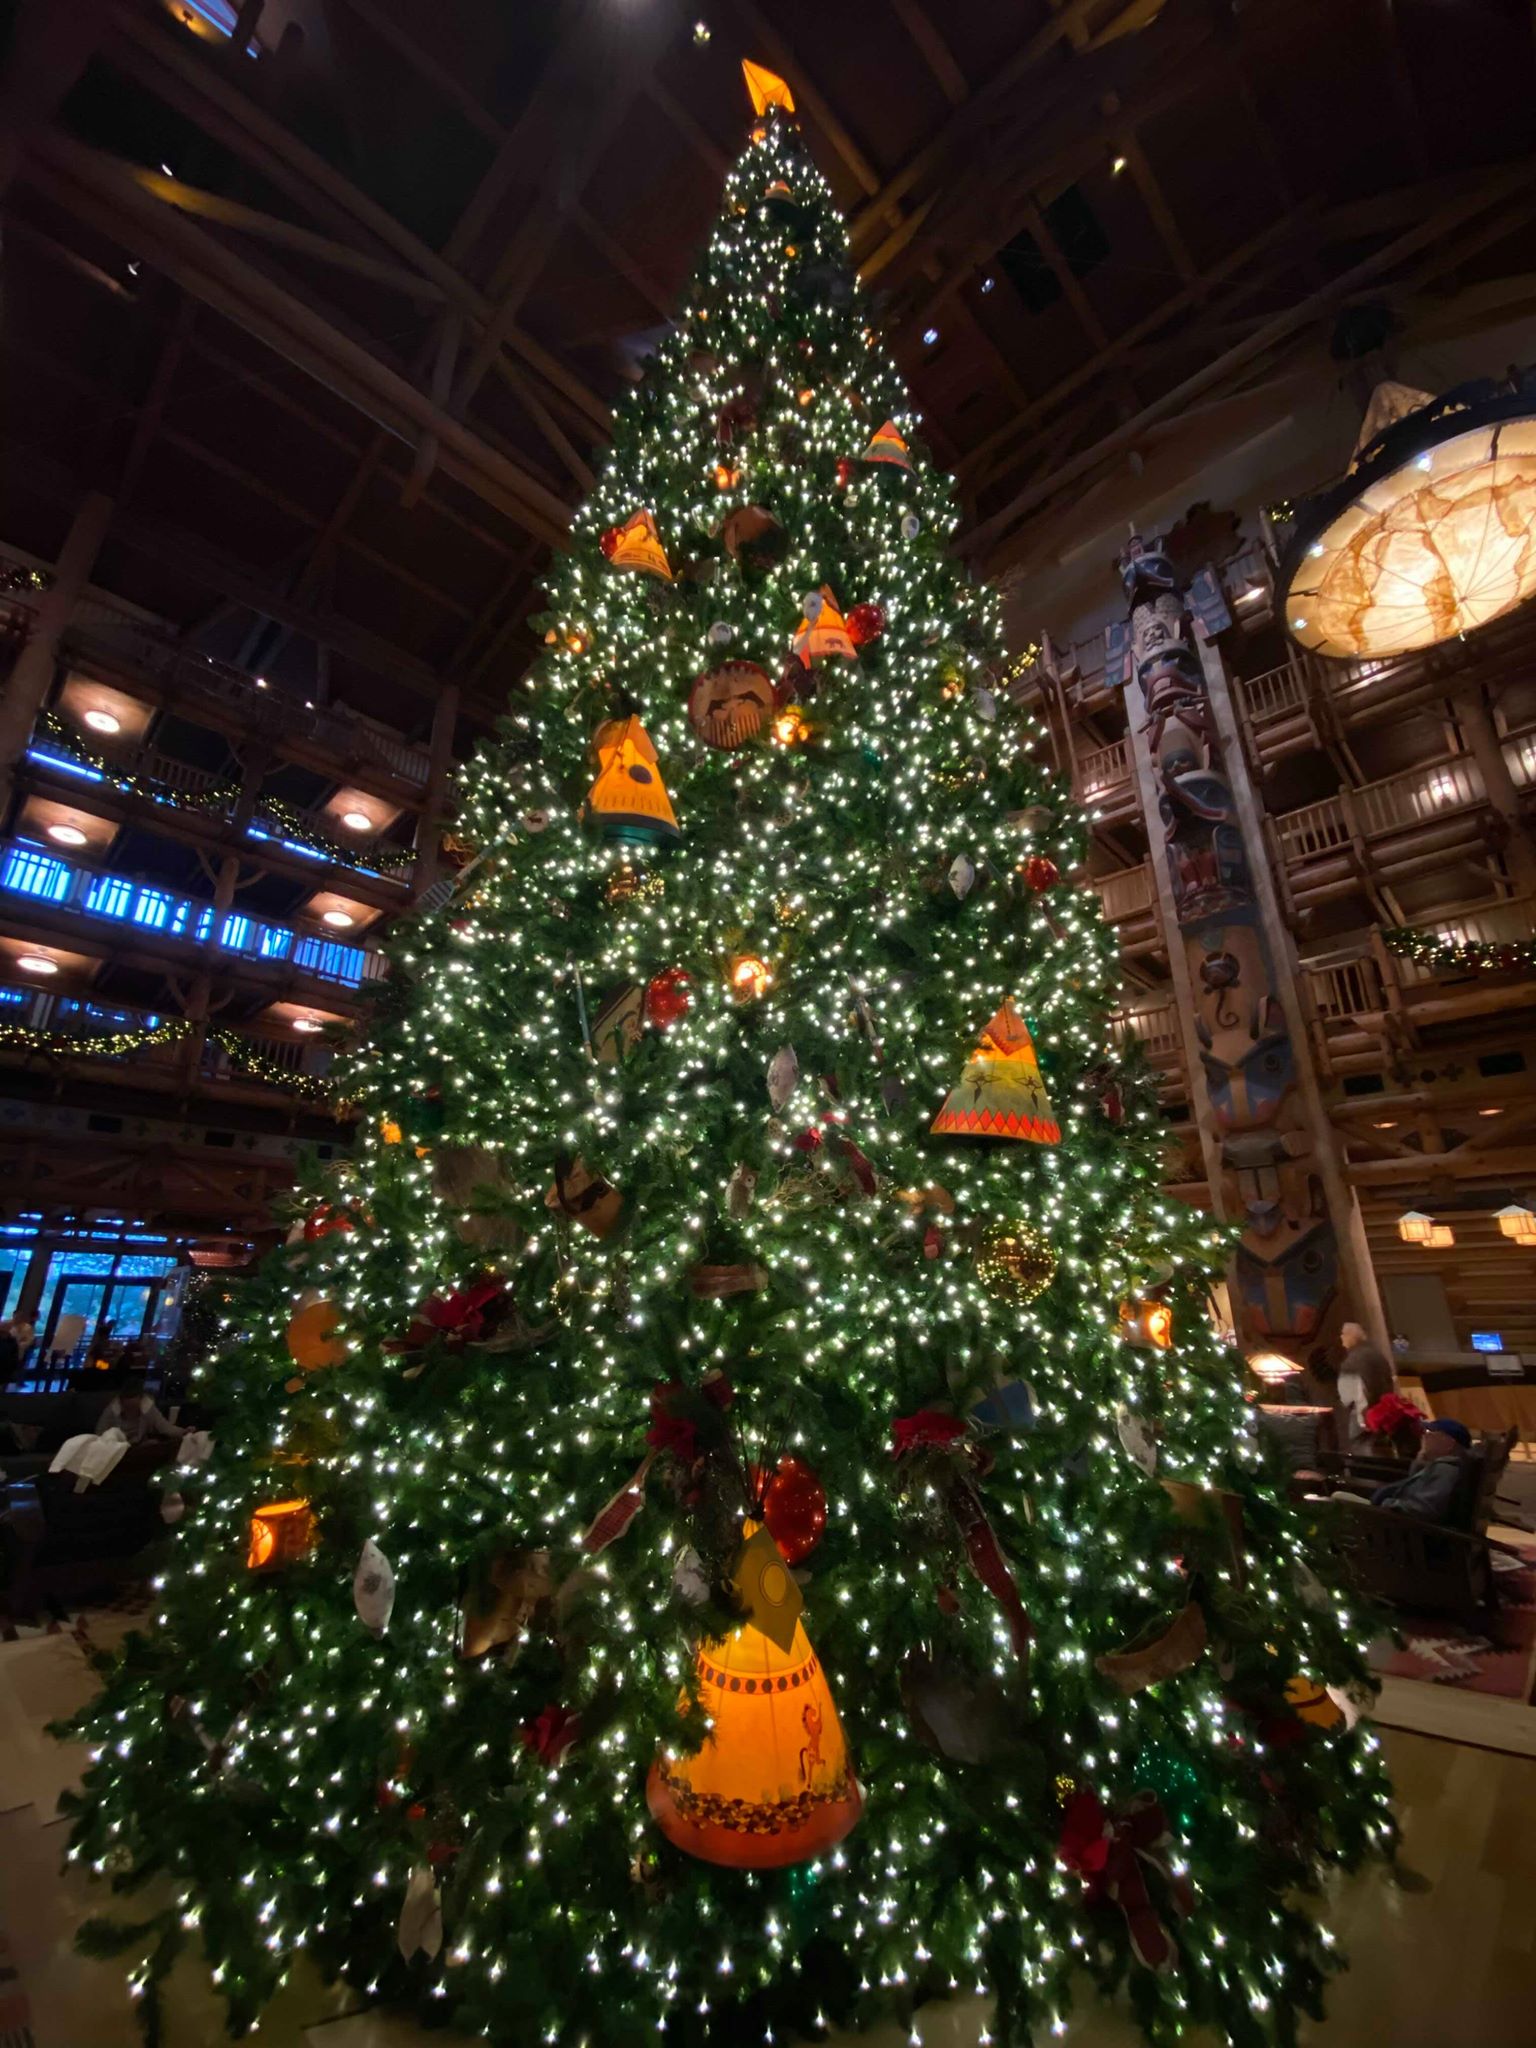 The Towering Christmas Tree Is Up at Wilderness Lodge - MickeyBlog.com